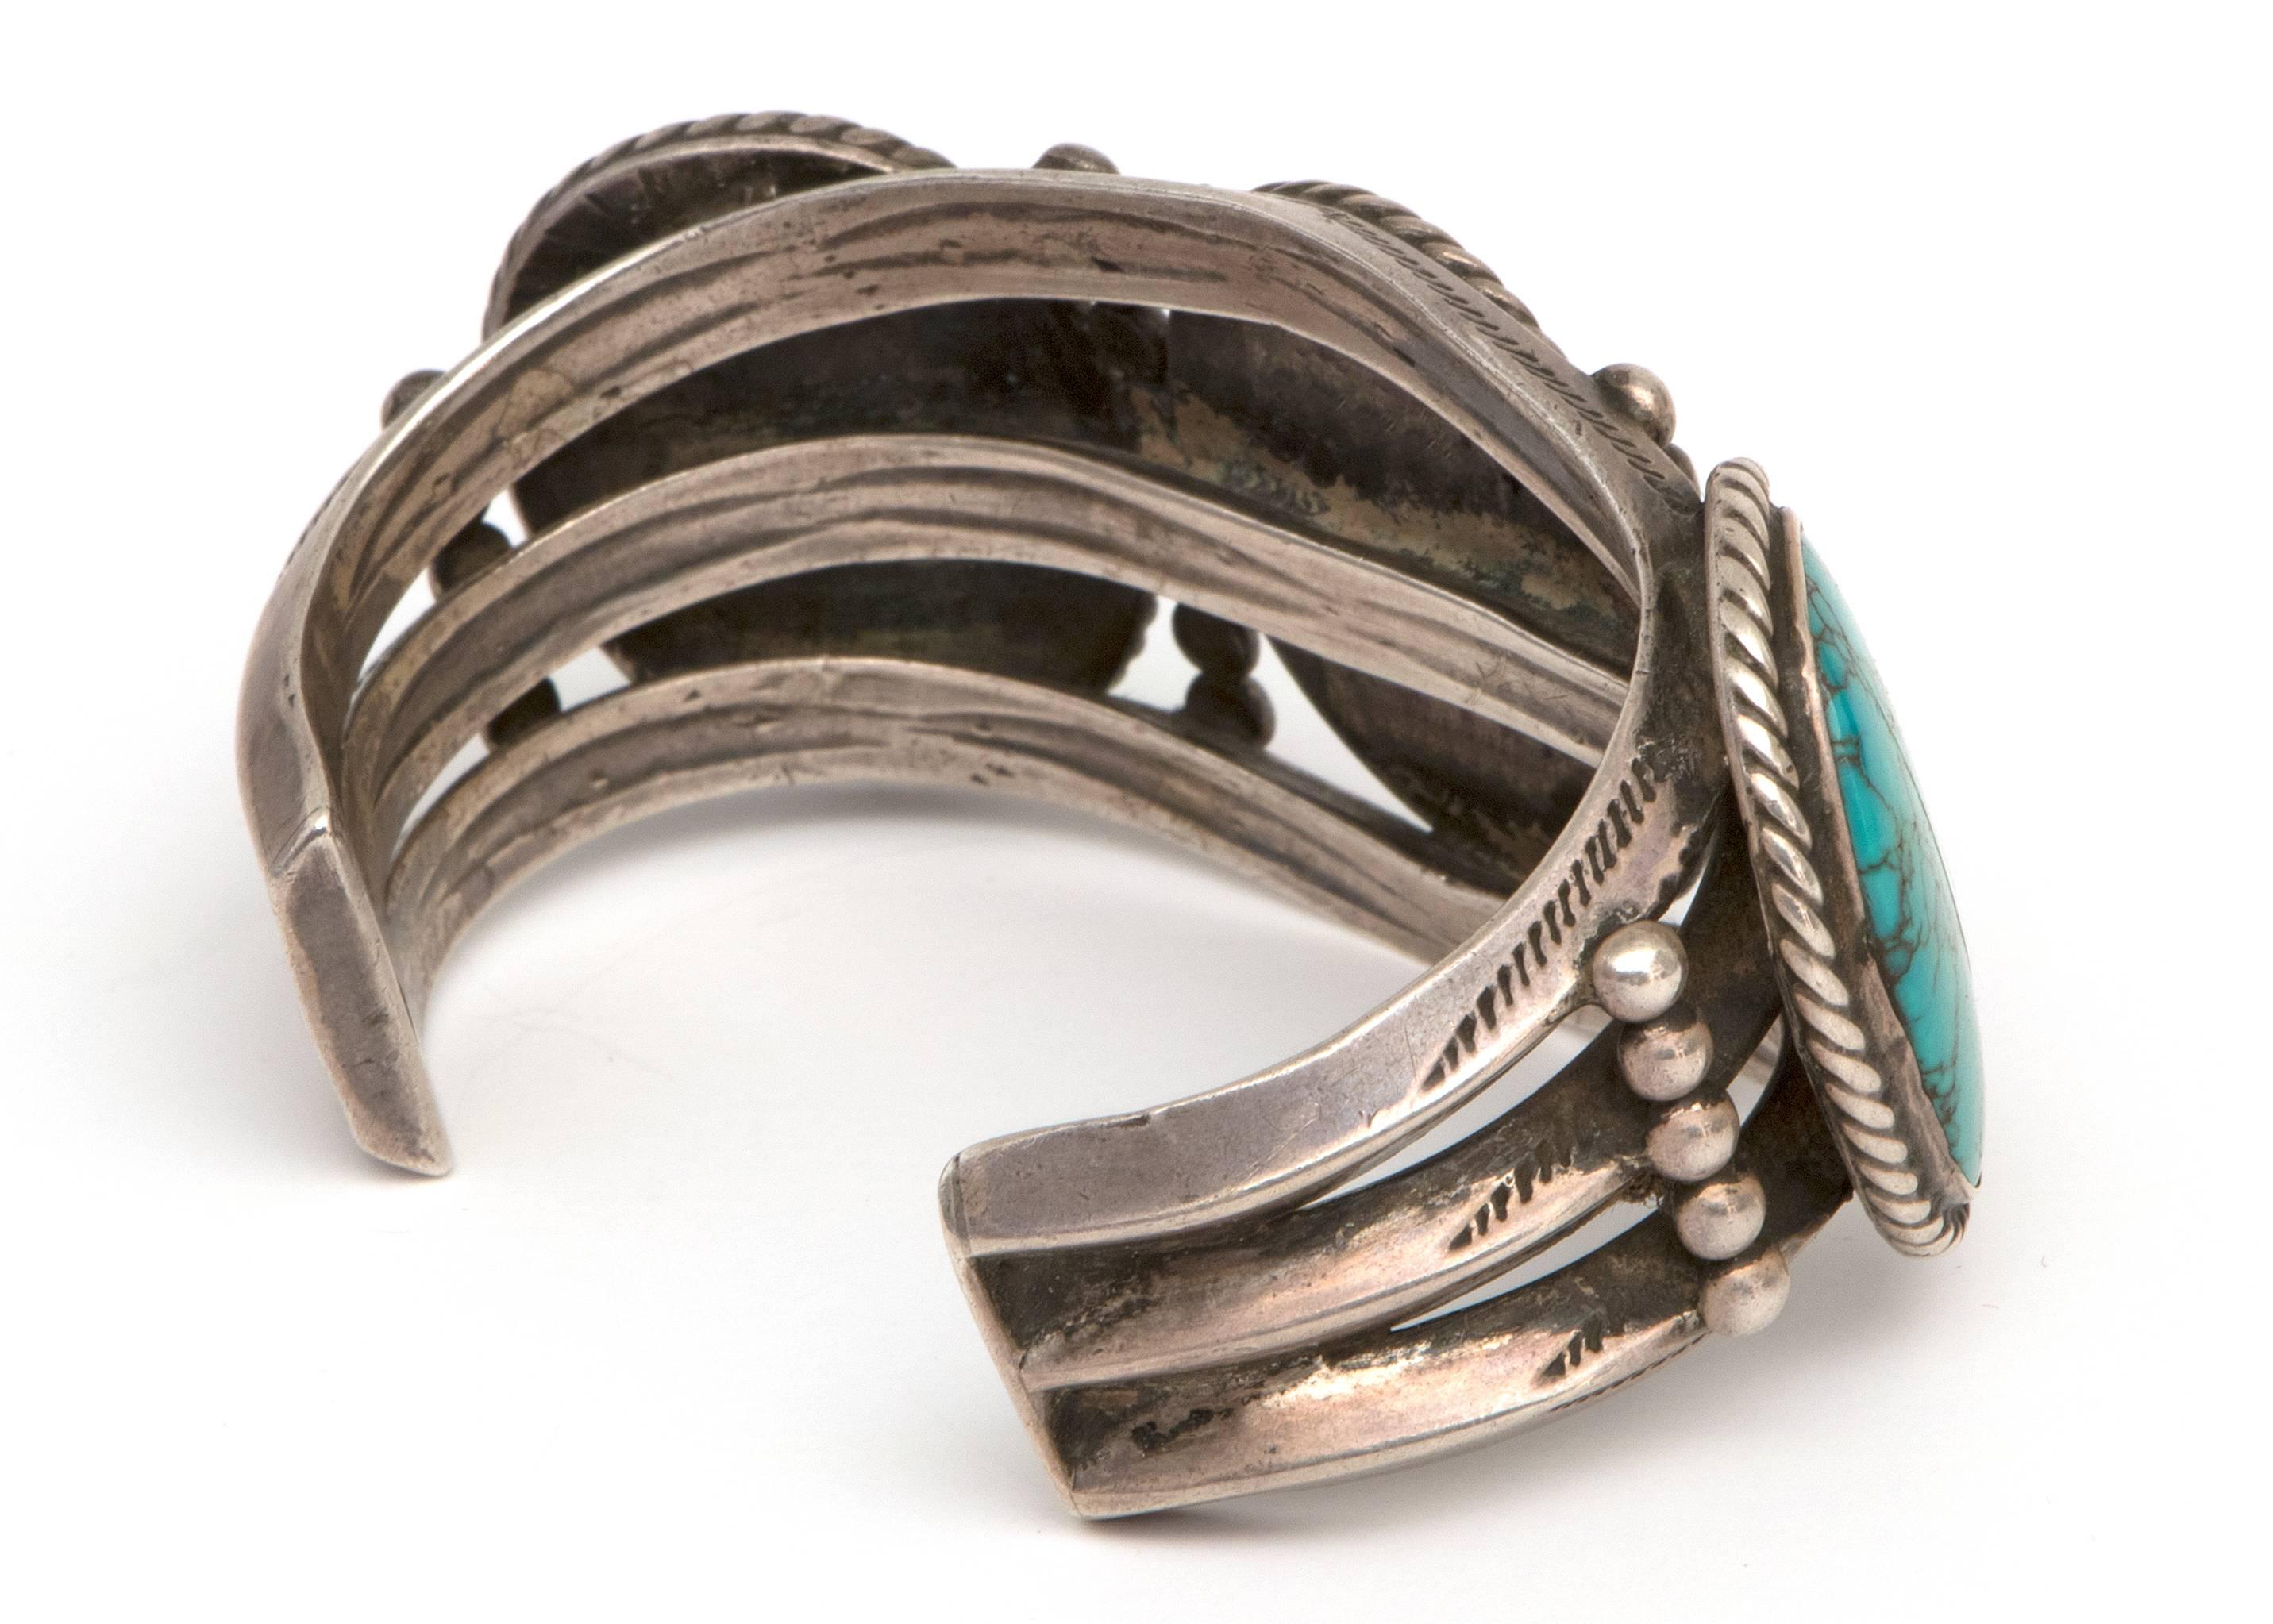 A vintage trading post era/old Pawn Navajo (Native American Indian) Southwestern silver cuff bracelet with three oval turquoise stones.  The bracelet has been minimally polished to preserve the patina and can be polished to a bright silver.